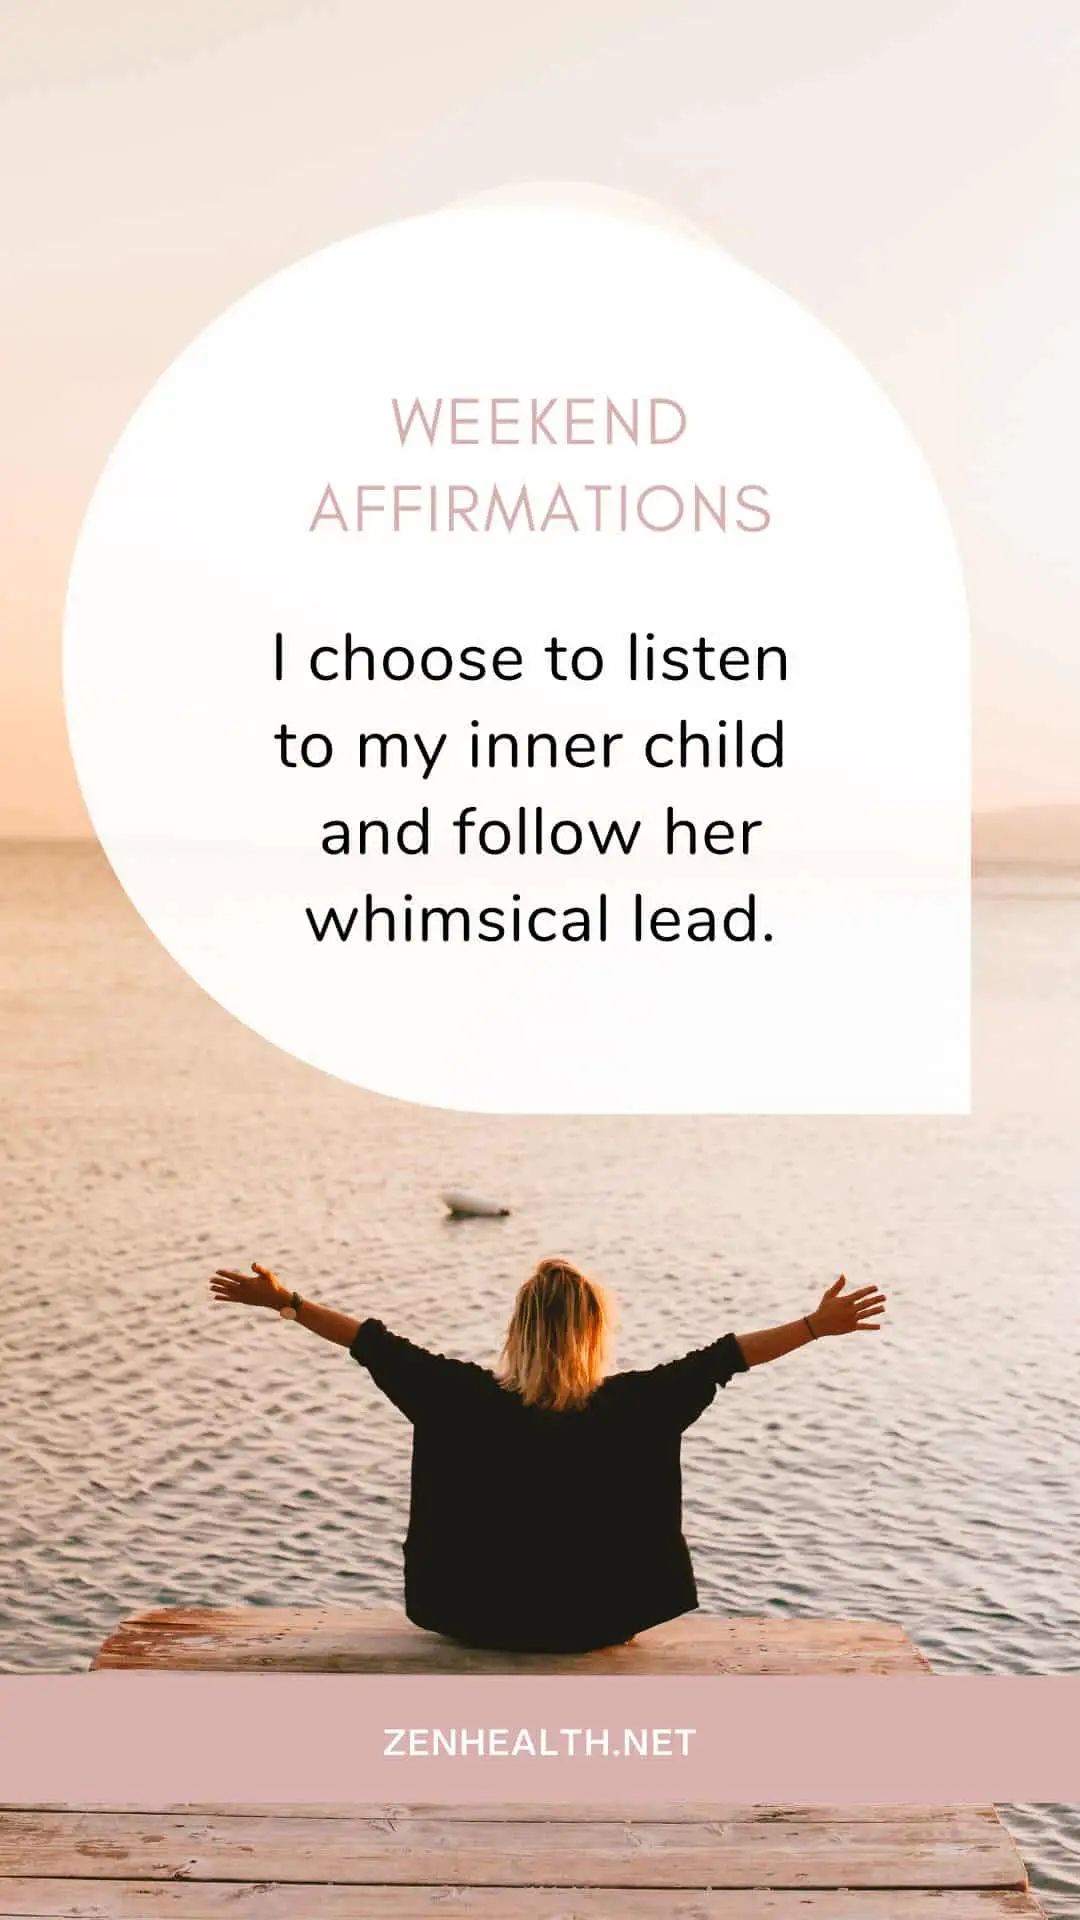 weekend affirmations: I choose to listen to my inner child and follow her whimsical lead